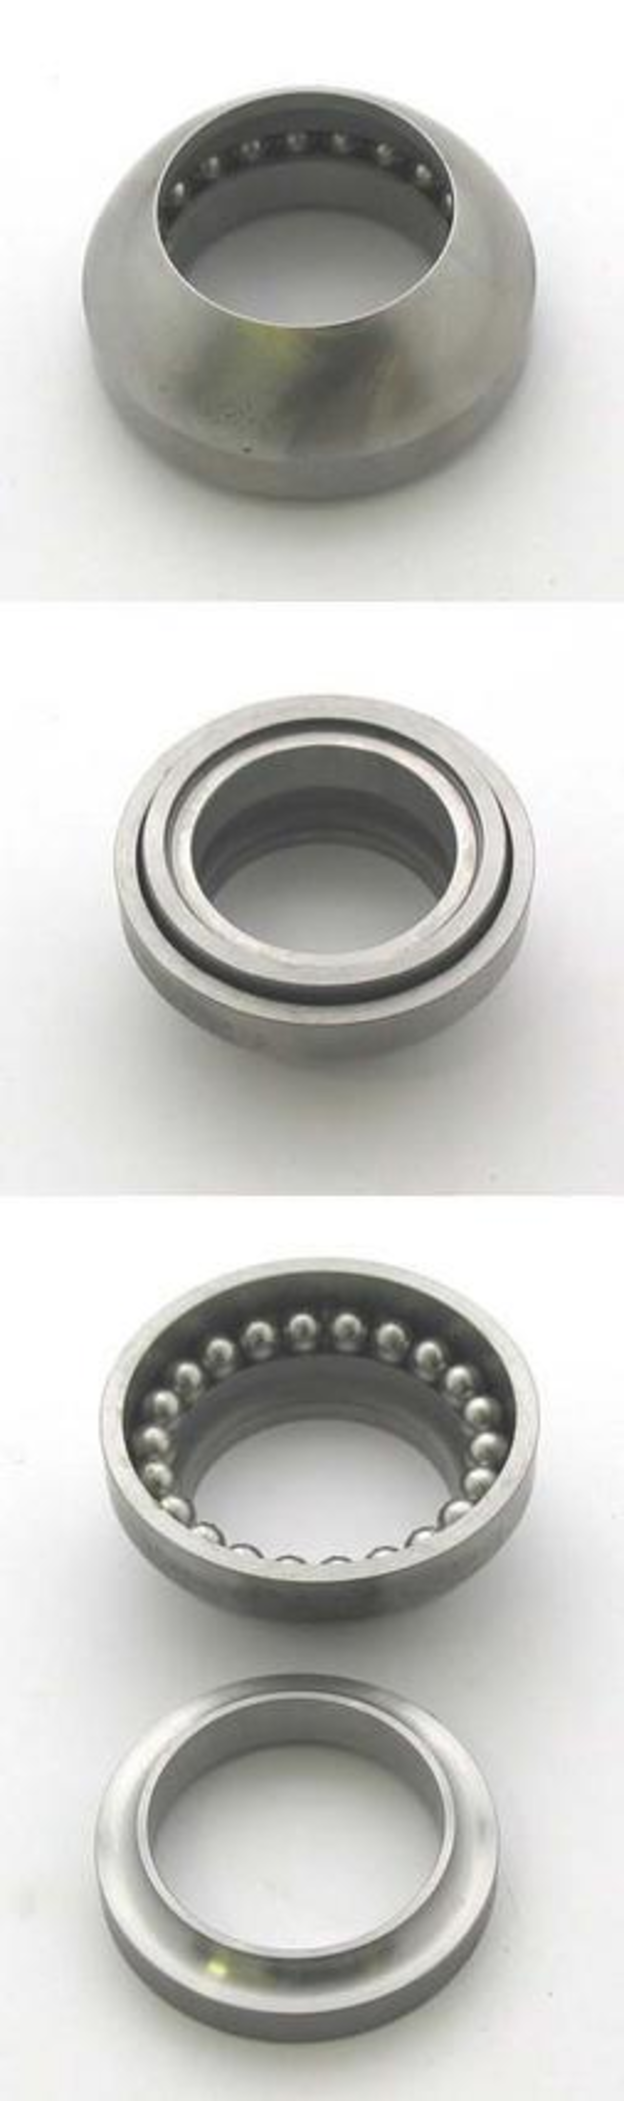 Bearing, spherical thrust, complete, Silver Ghost